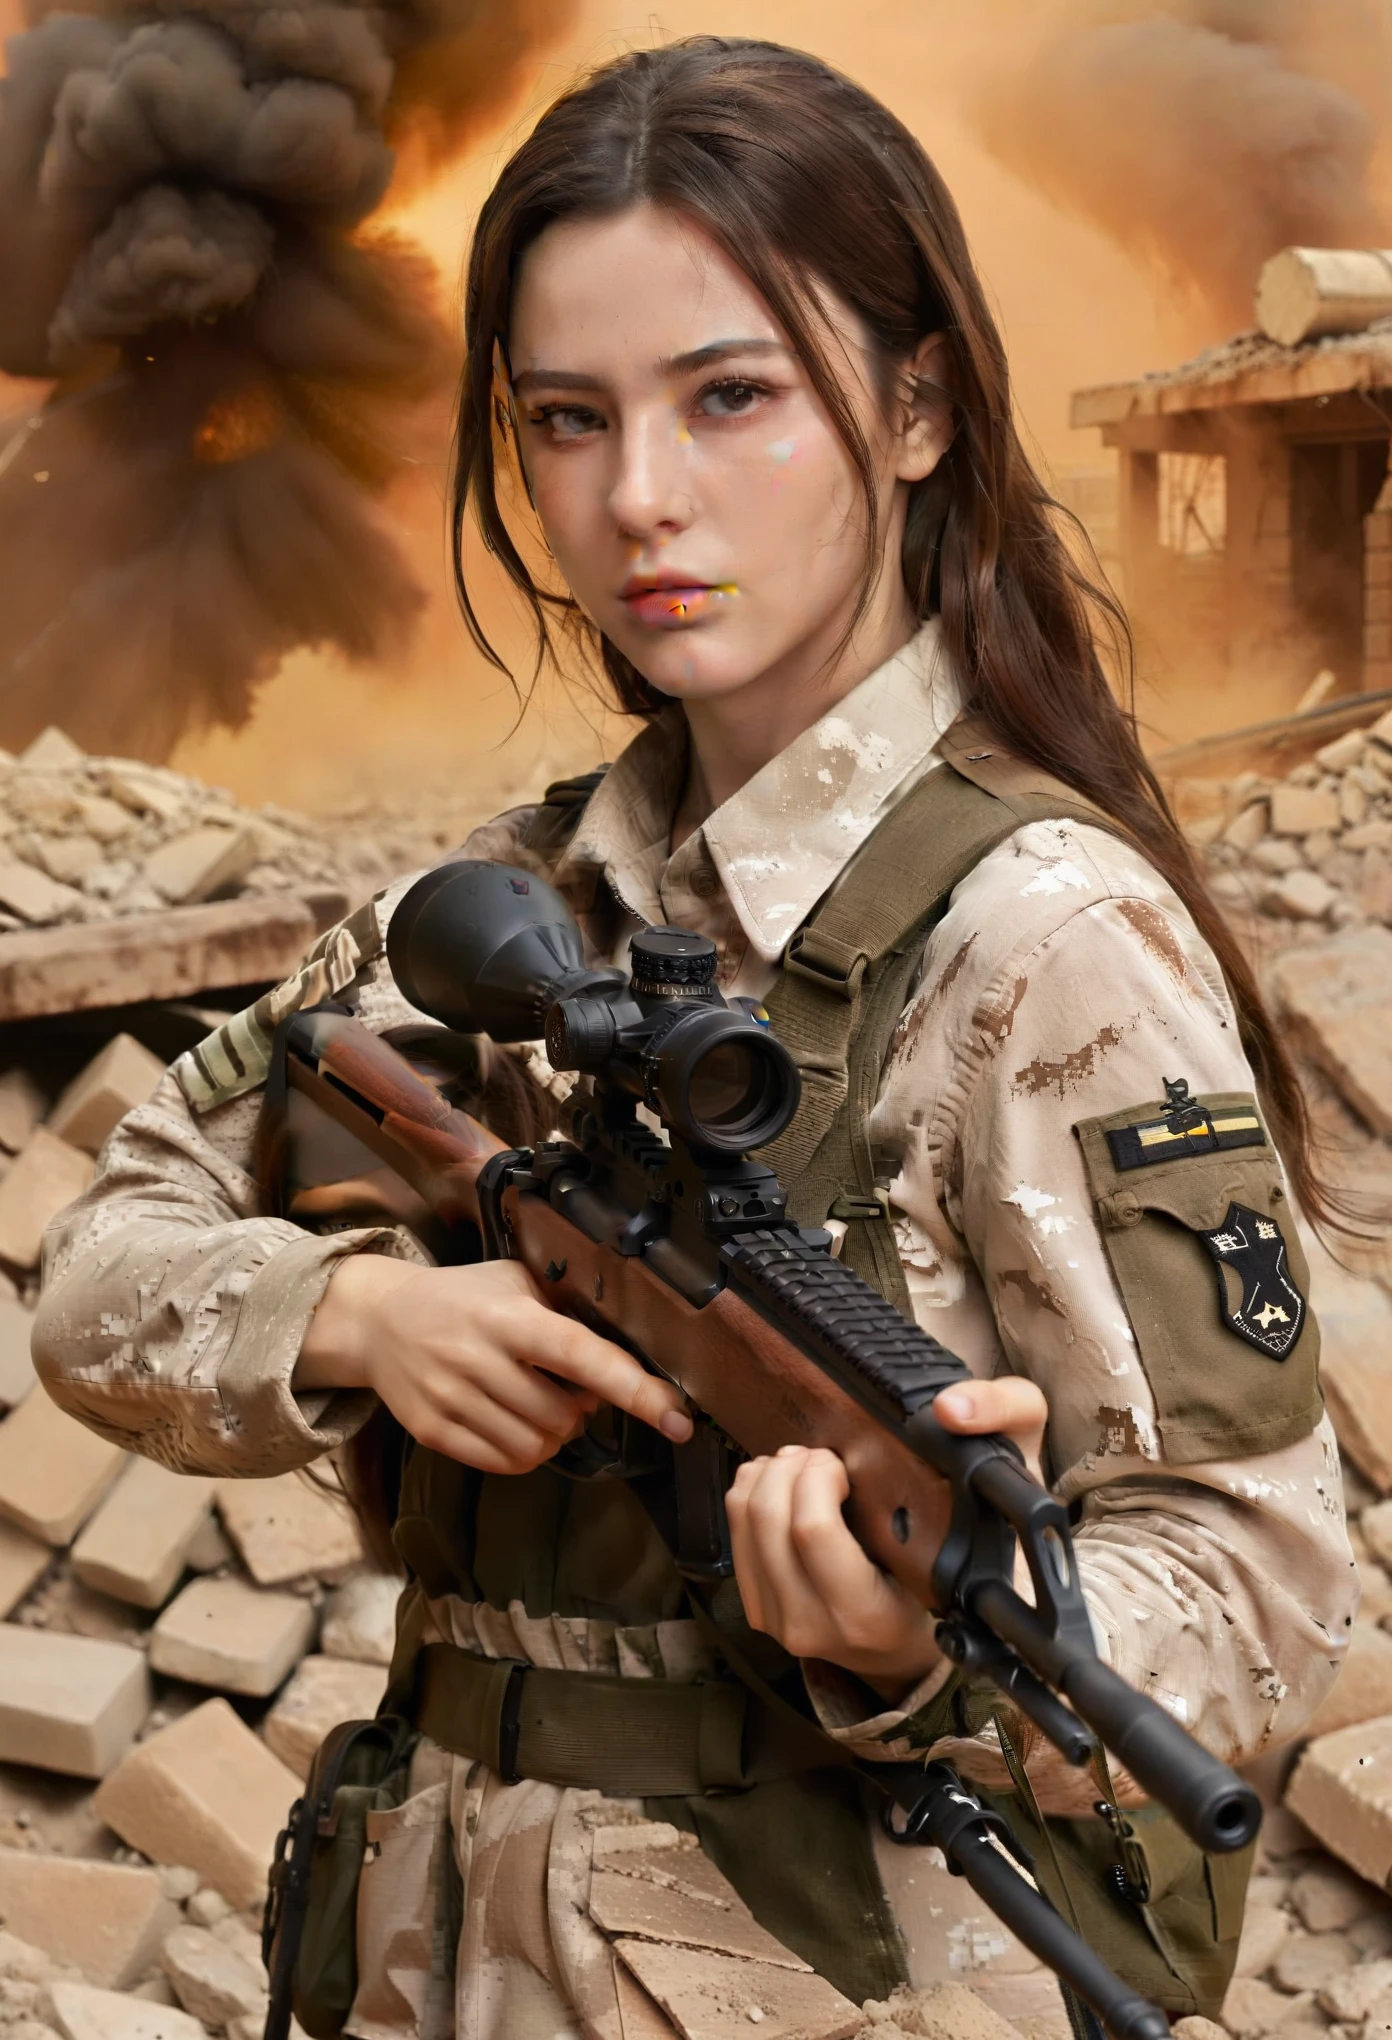 photorealistic、Realistic skin textures、A photo of Dasha Taran, ohwx woman,A beautiful detailed figure of Dasha Taran belonging to the American military is aiming with a sniper rifle.、standing、On the rubble、brown dust smoke、Action poses with movement、Image from front top